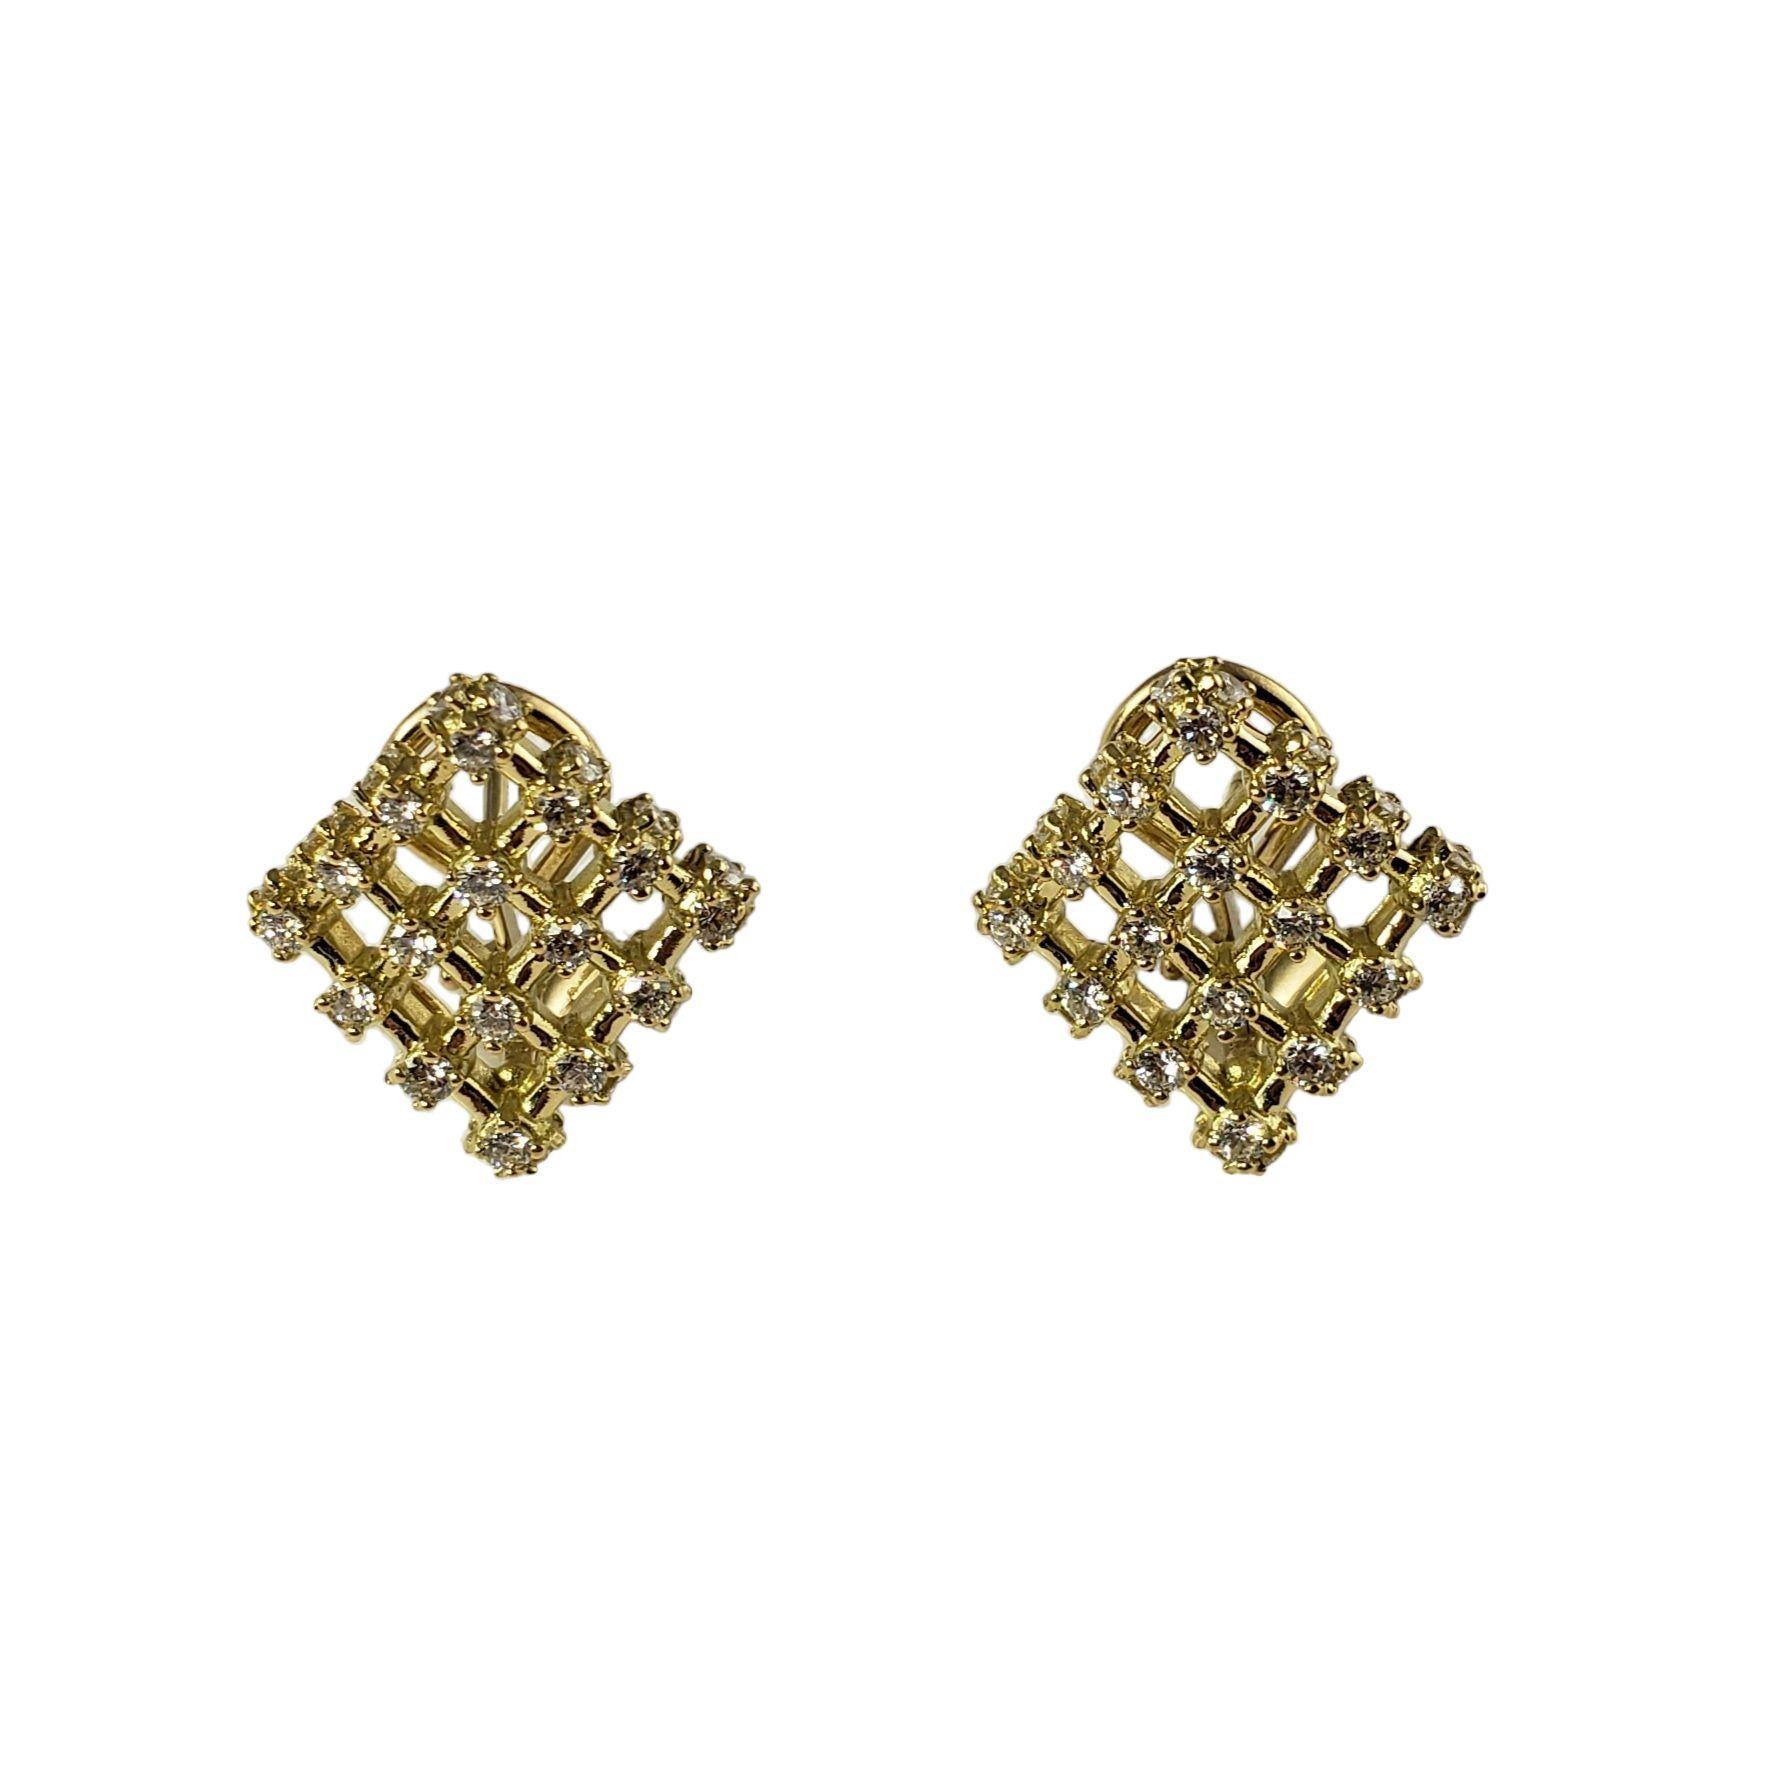 Paul Morelli 18 Karat Yellow Gold and Diamond Earrings-

These stunning earrings by Paul Morelli each feature 16 round brilliant cut diamonds set in beautifully detailed 18K yellow gold.  Omega back closures.

Approximate total diamond weight: .96